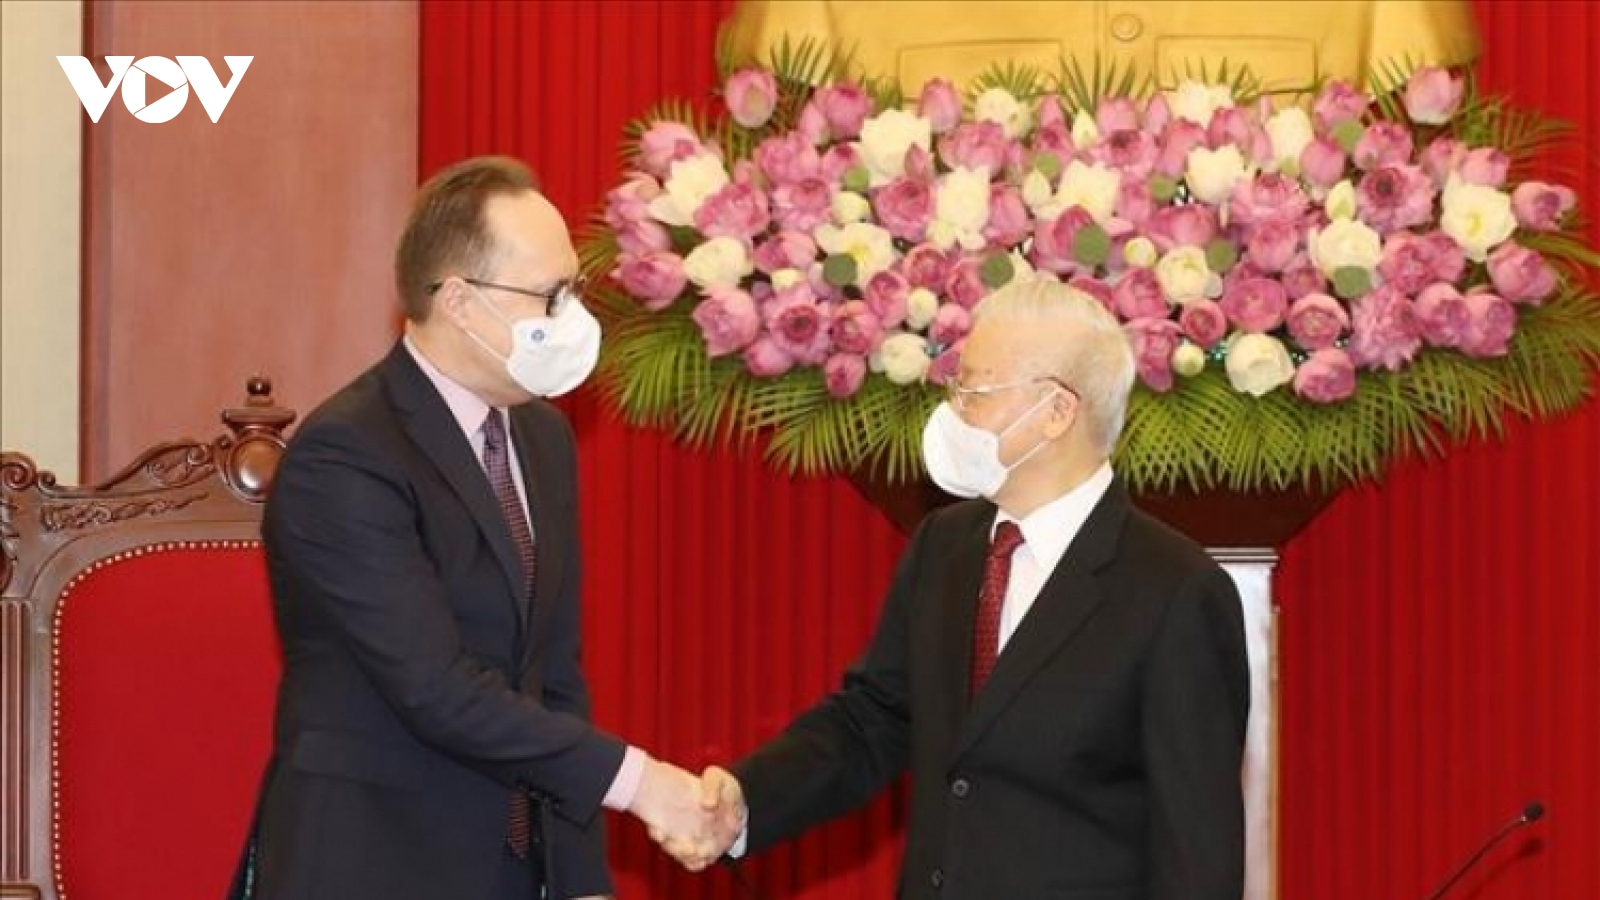 Party chief elated at growing Vietnam-Russia ties despite COVID-19